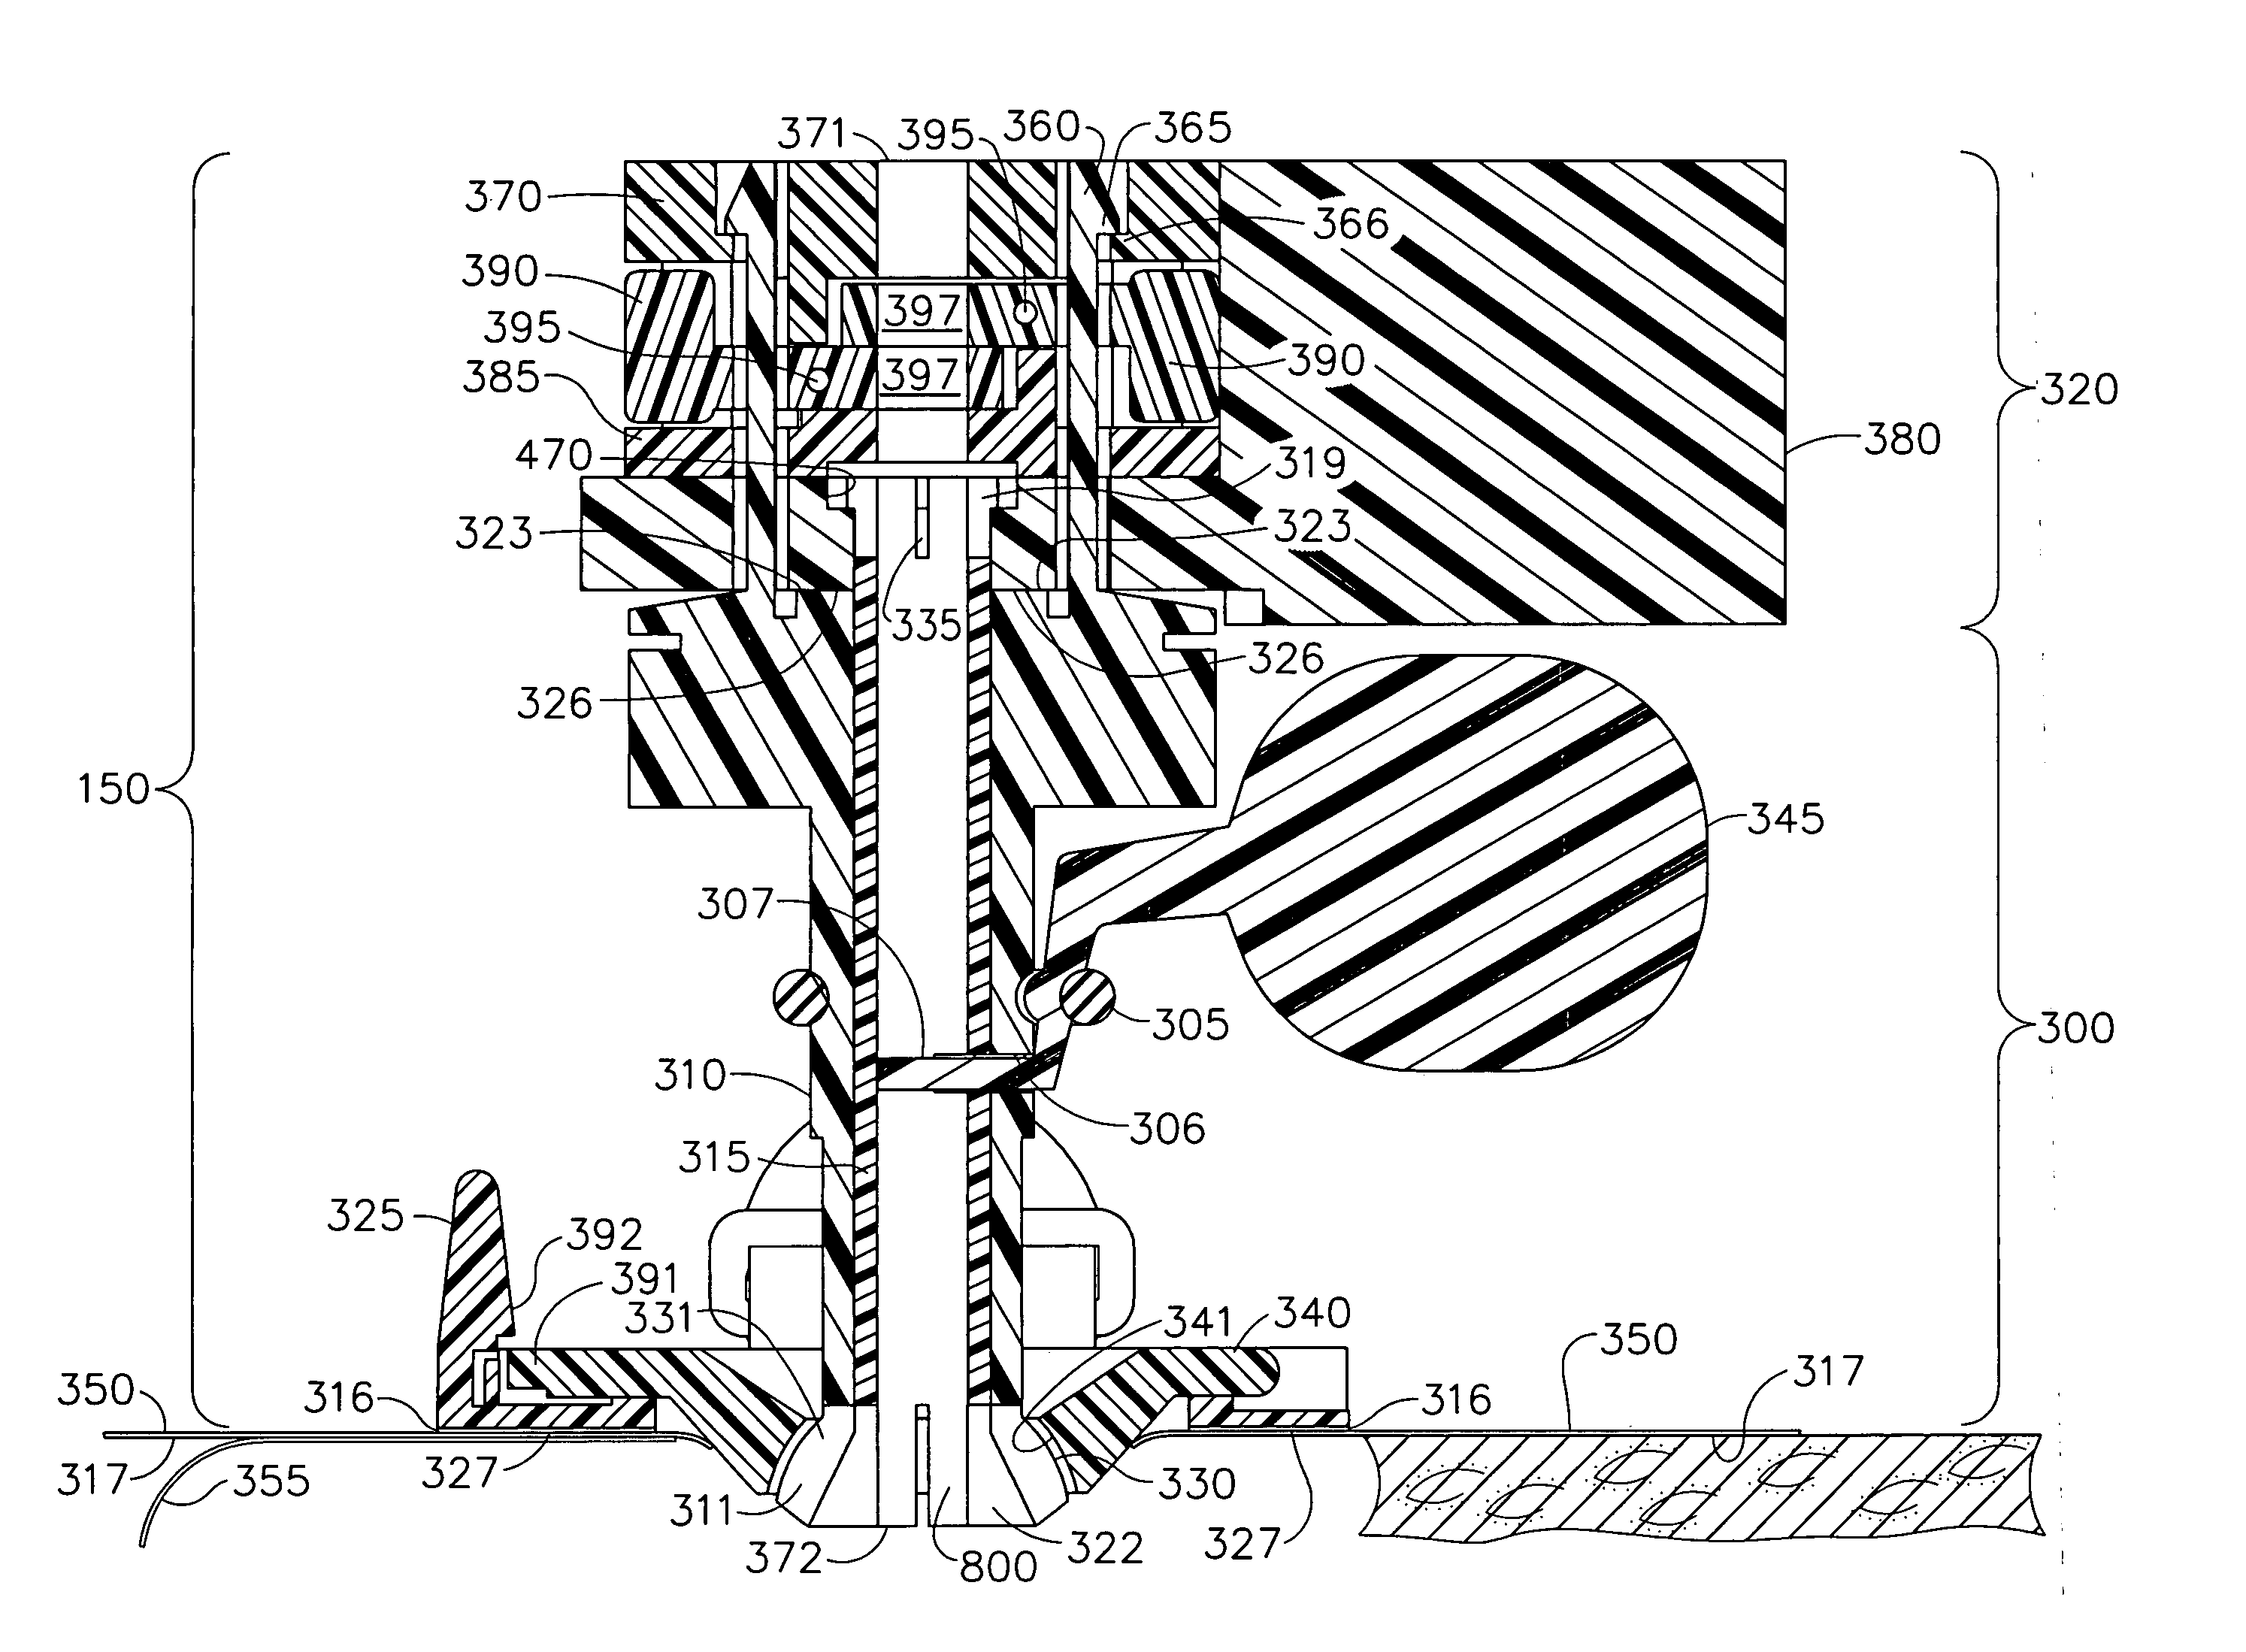 Surgical device guide for use with an imaging system